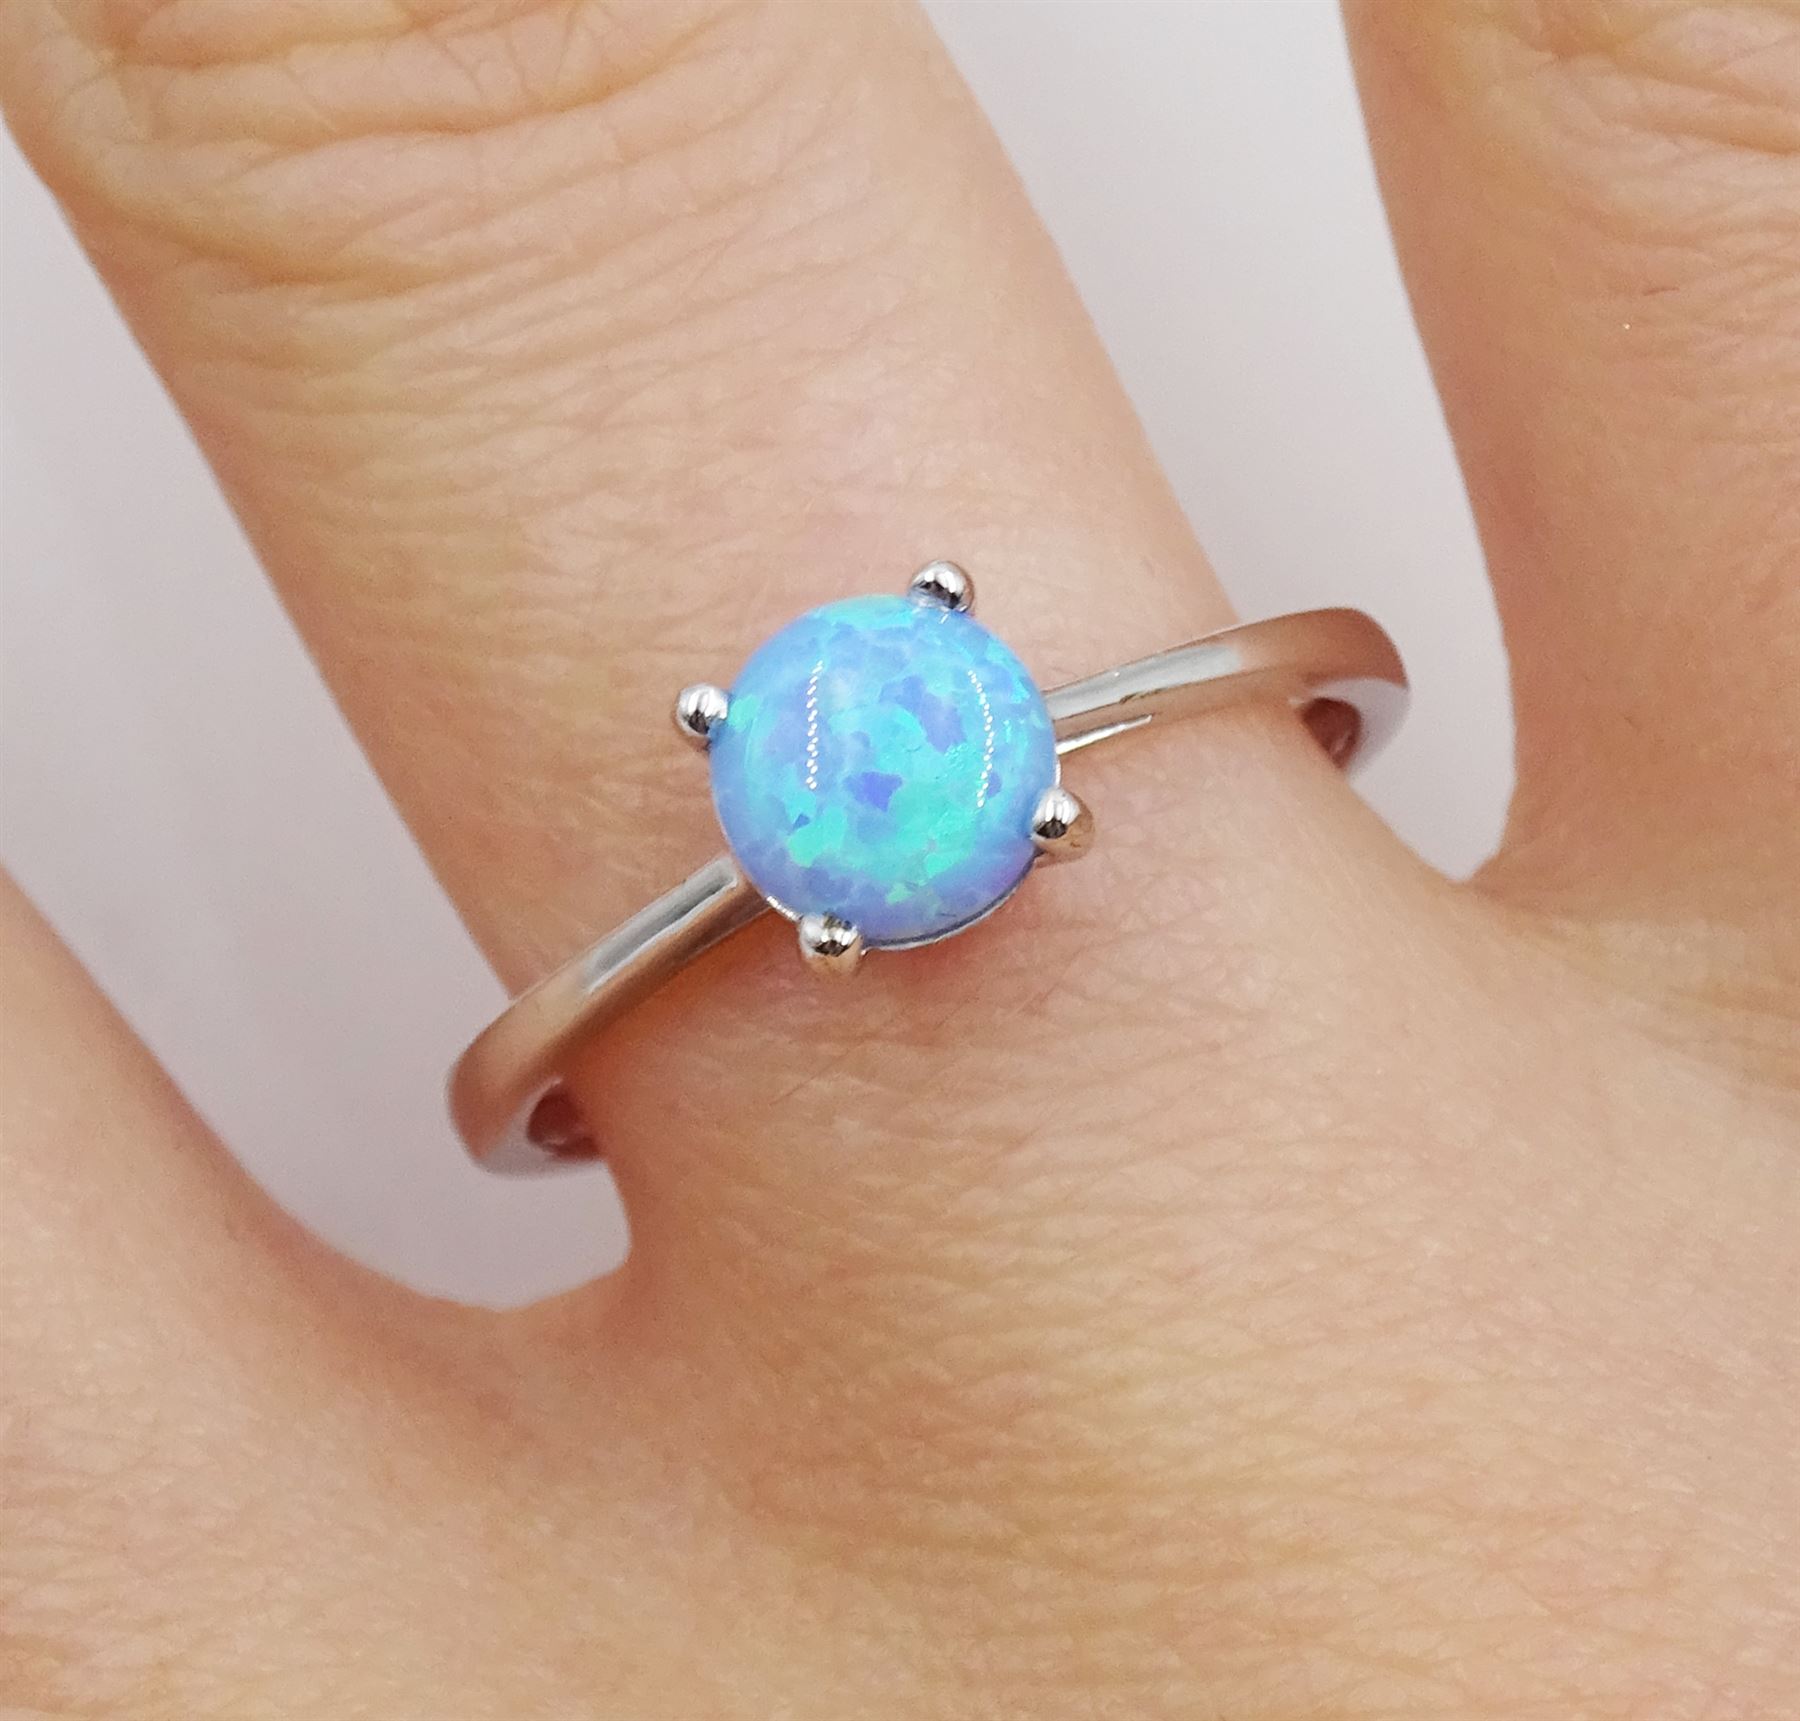 9ct white gold single stone opal ring - Image 2 of 4